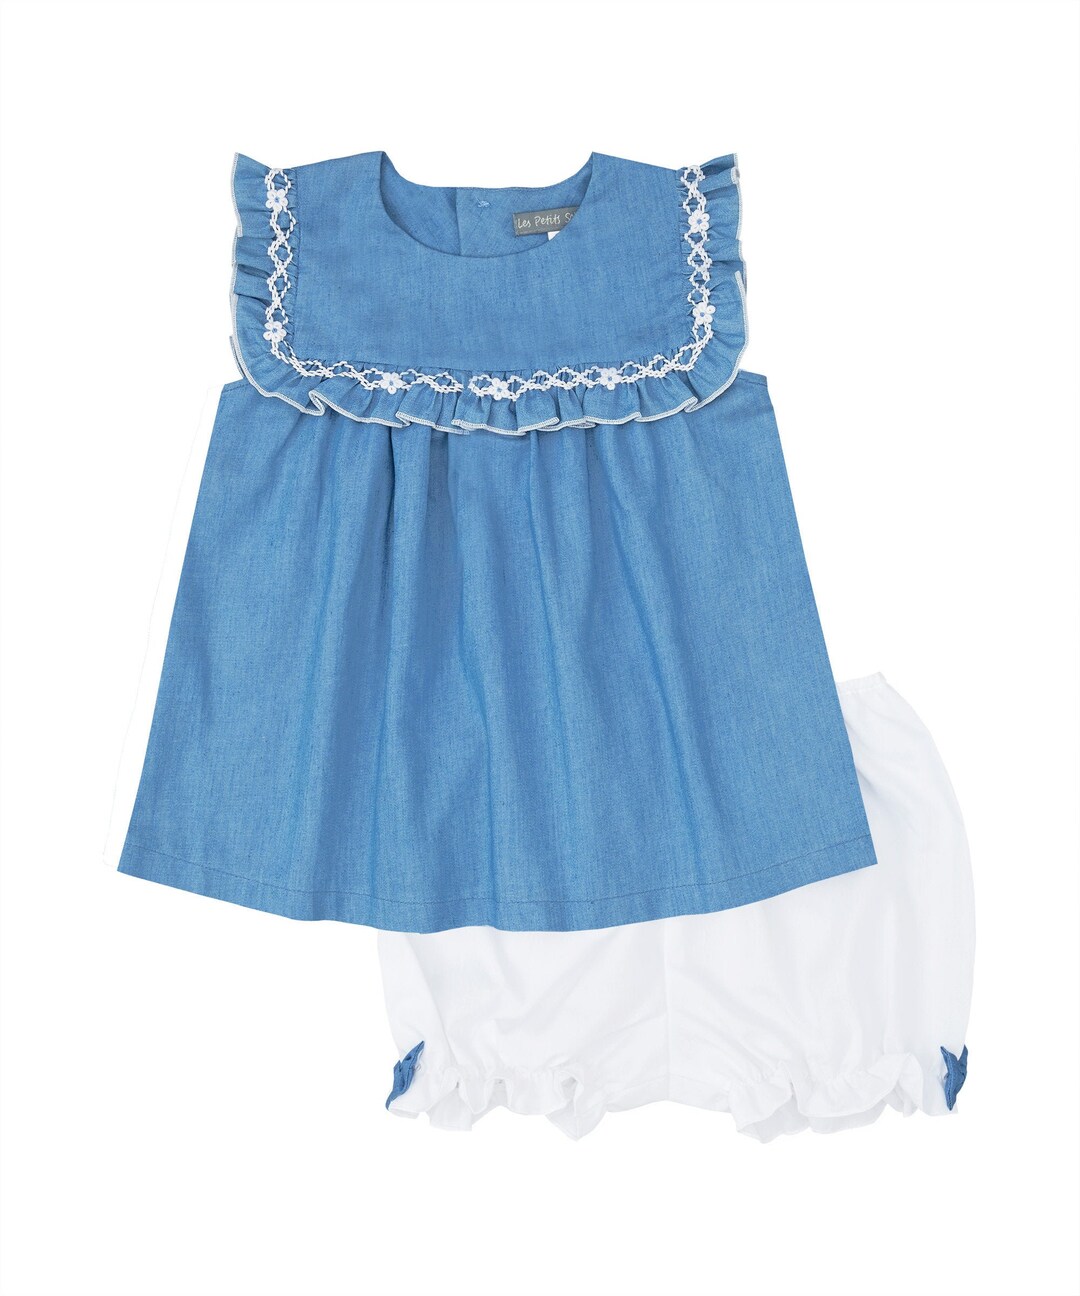 Blue & White Smocked Denim Ruffle Top and Bloomers - Etsy